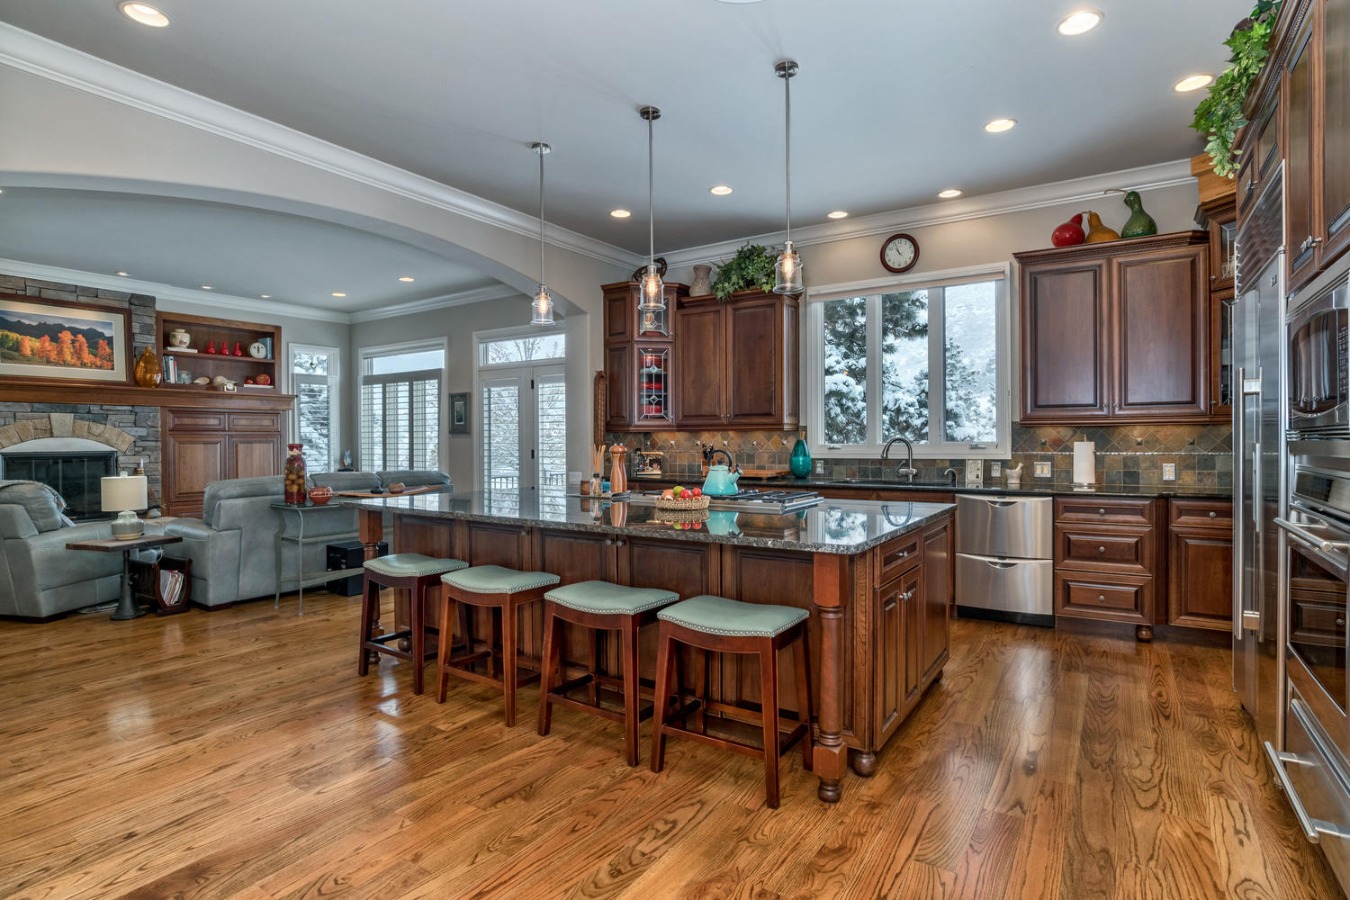 Spacious Gourmet Kitchen is the Heart of This Home